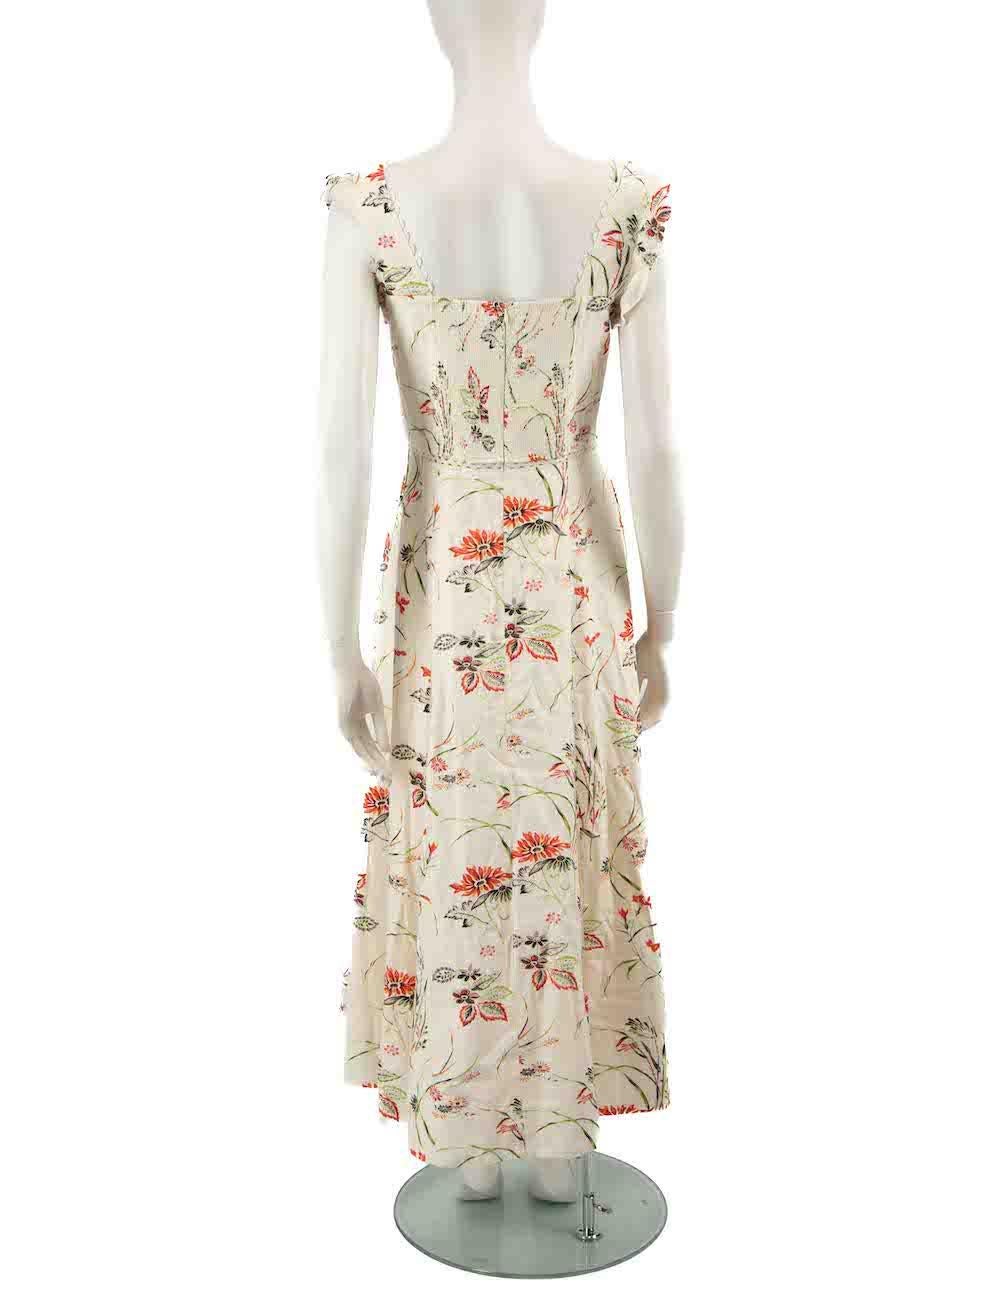 ME+EM Floral Pattern Scalloped Detail Dress Size M In Excellent Condition For Sale In London, GB